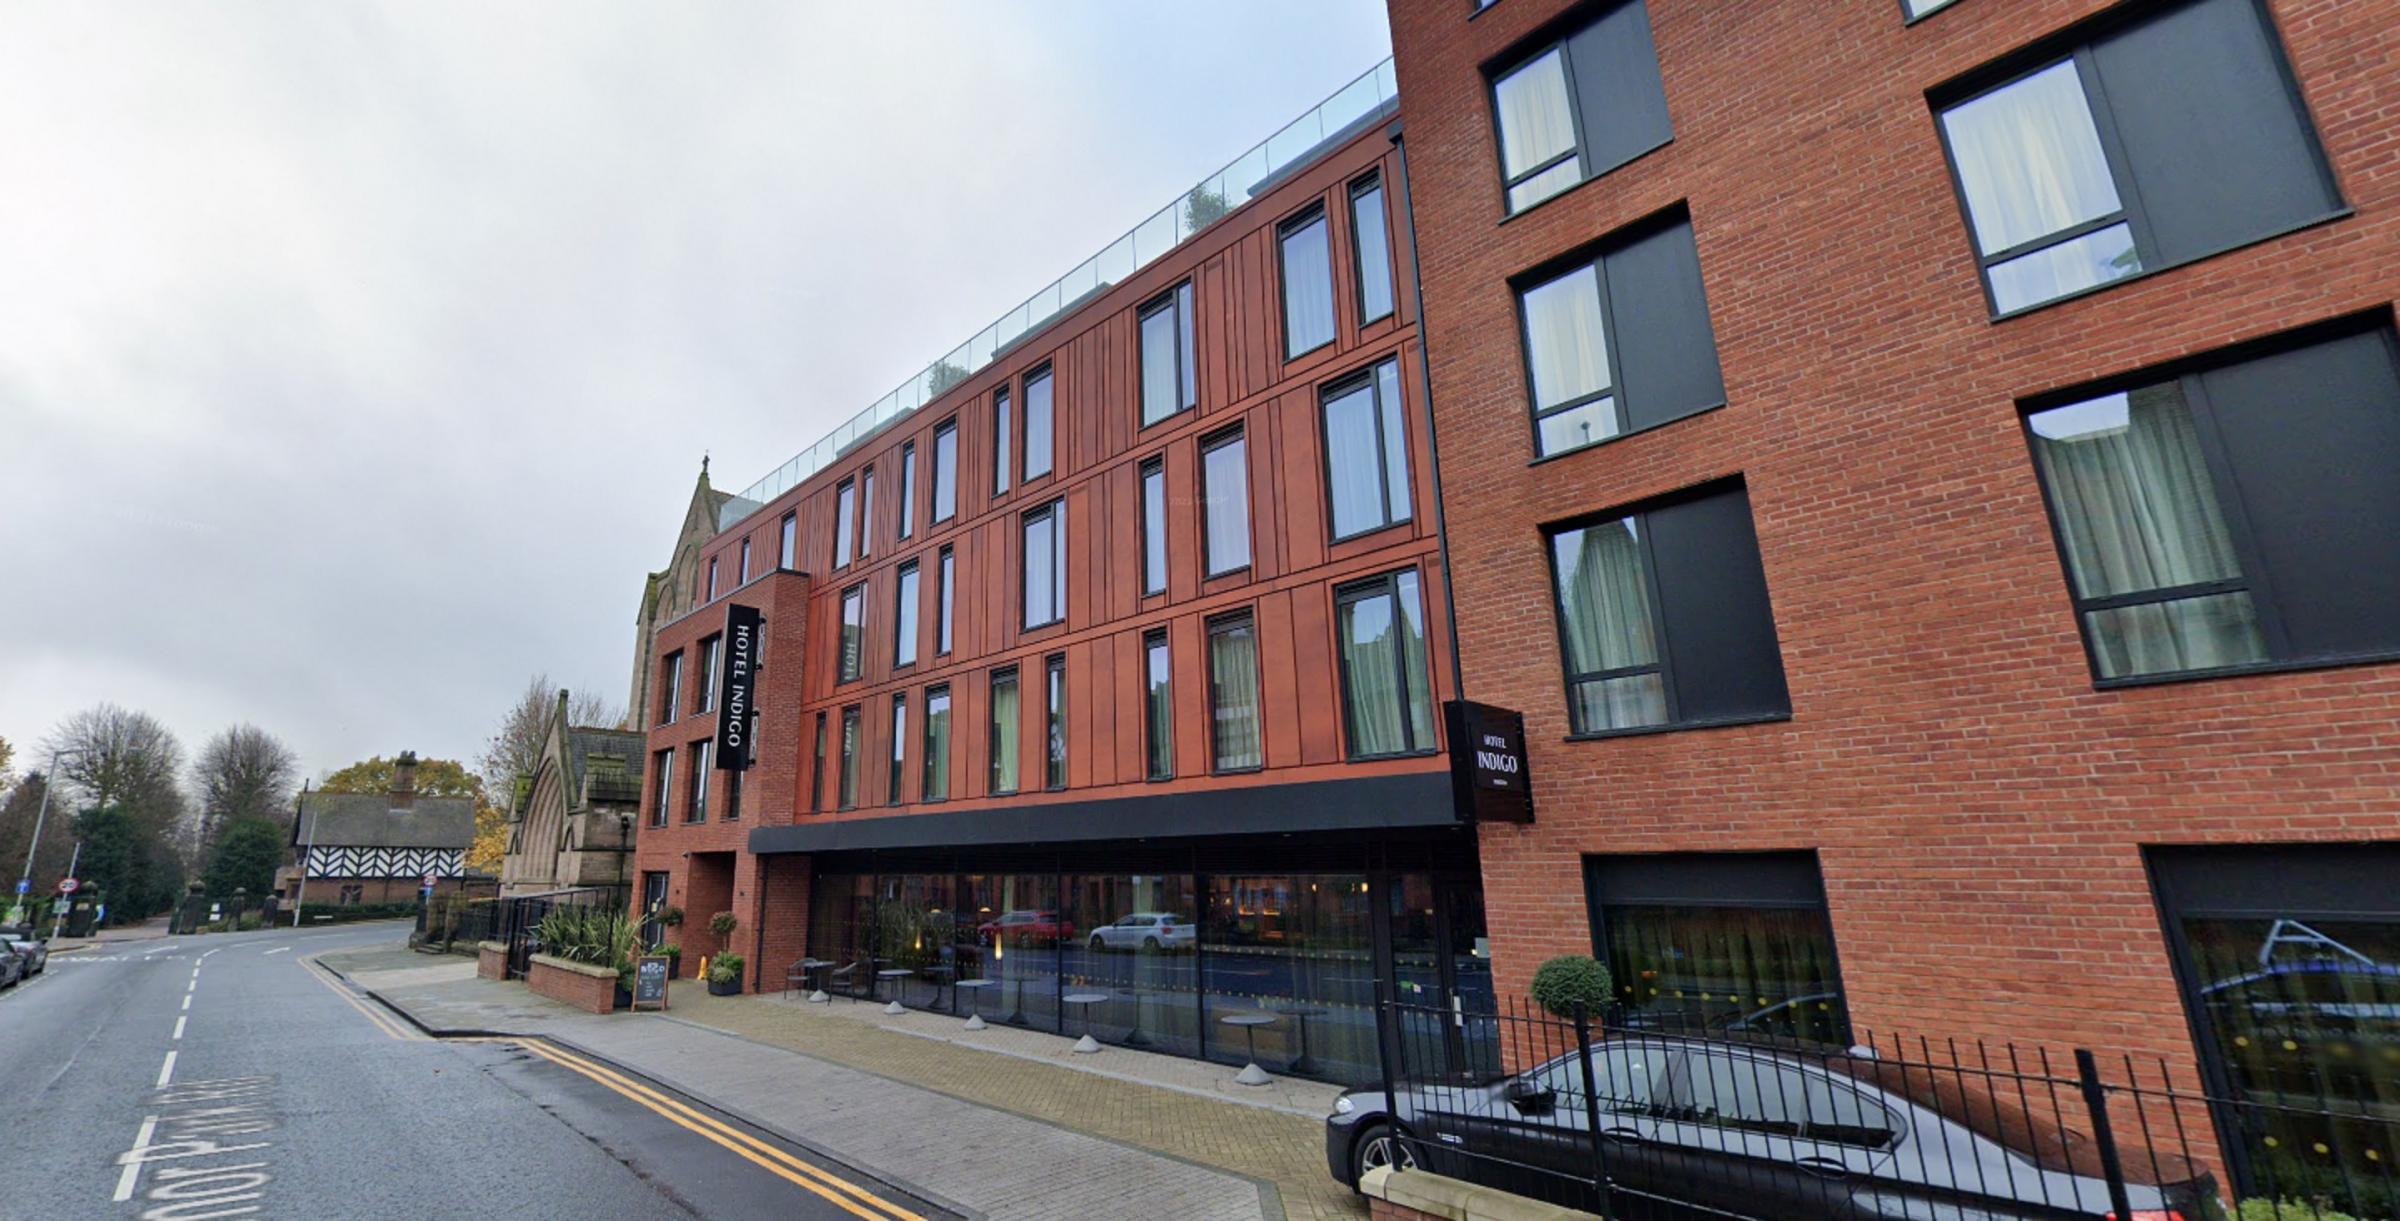 The Forge will open at the Hotel Indigo site in Chester.